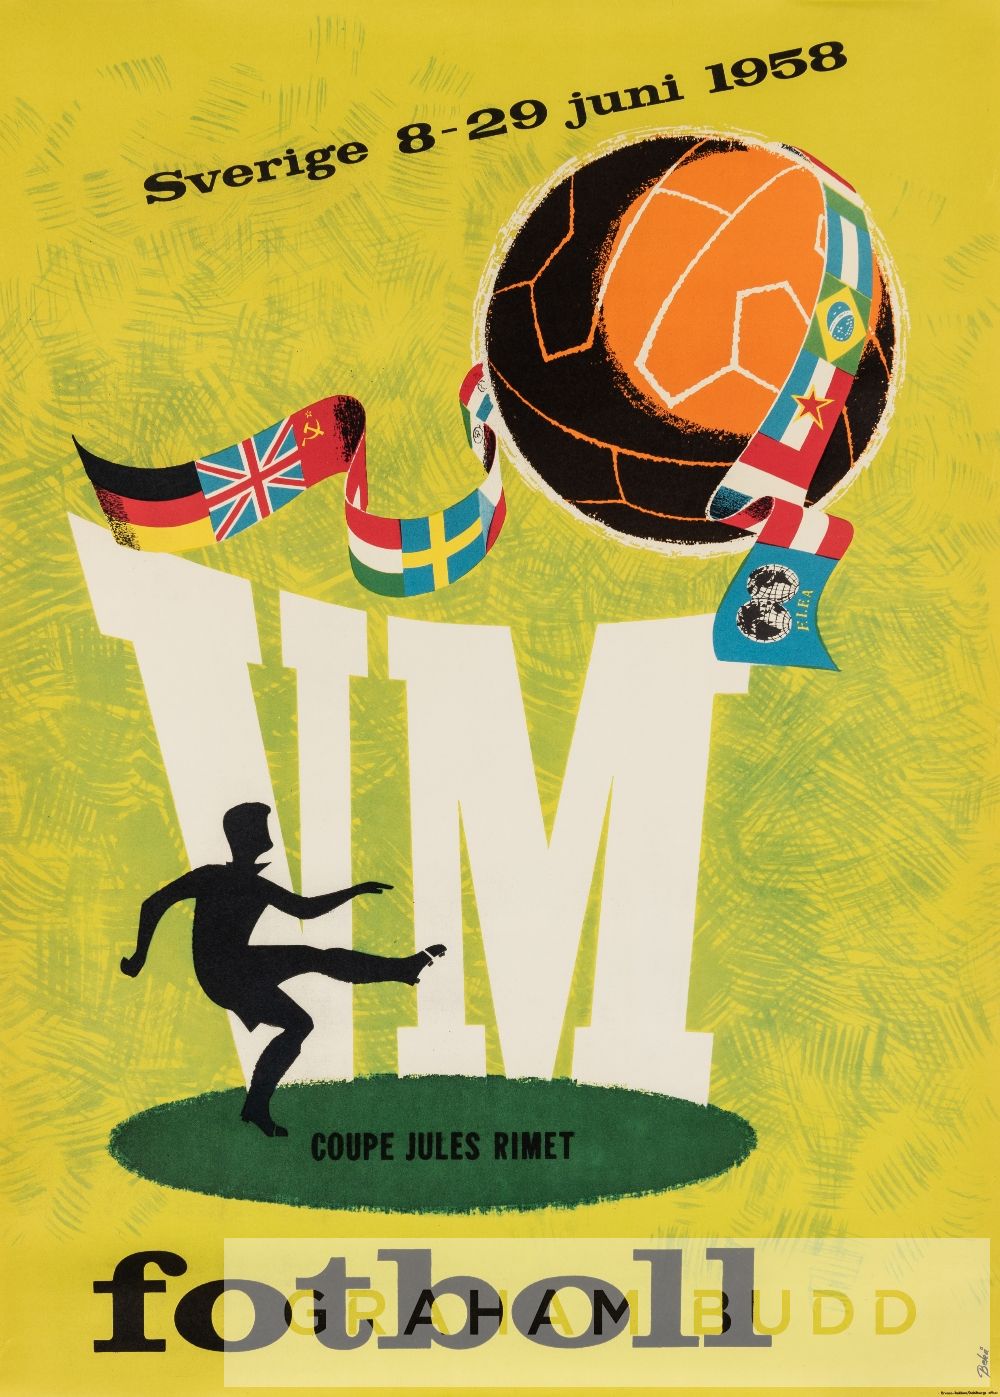 Sweden 1958 FIFA World Cup official tournament advertising poster, designed by Beka, published by